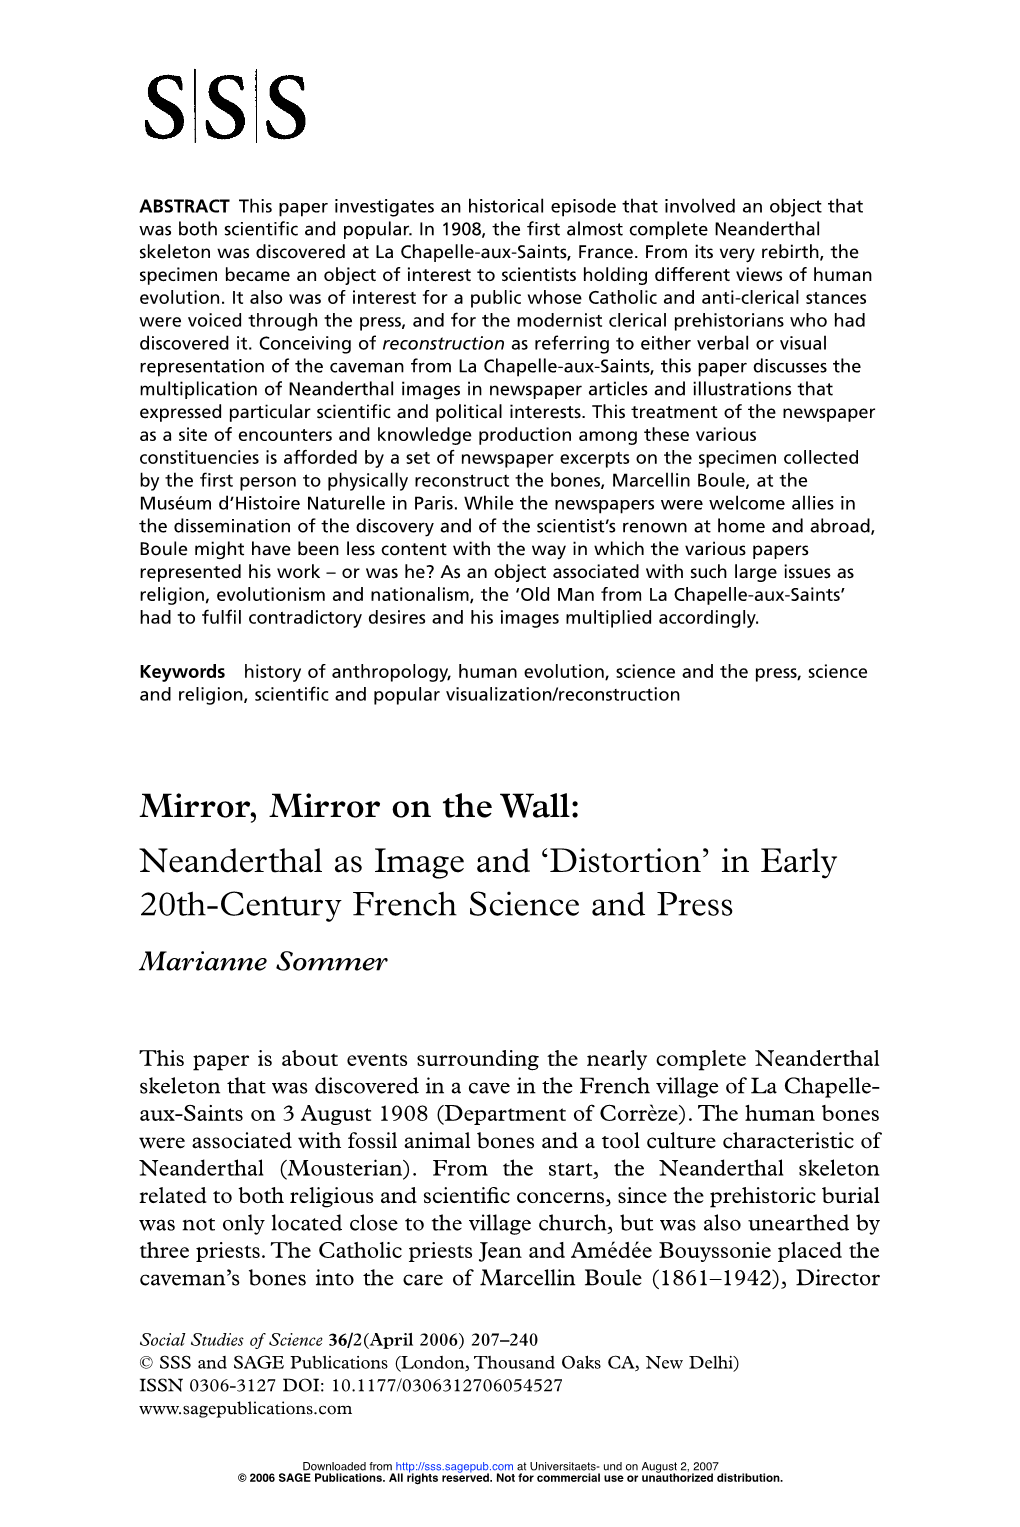 Mirror, Mirror on the Wall: Neanderthal As Image and ‘Distortion’ in Early 20Th-Century French Science and Press Marianne Sommer